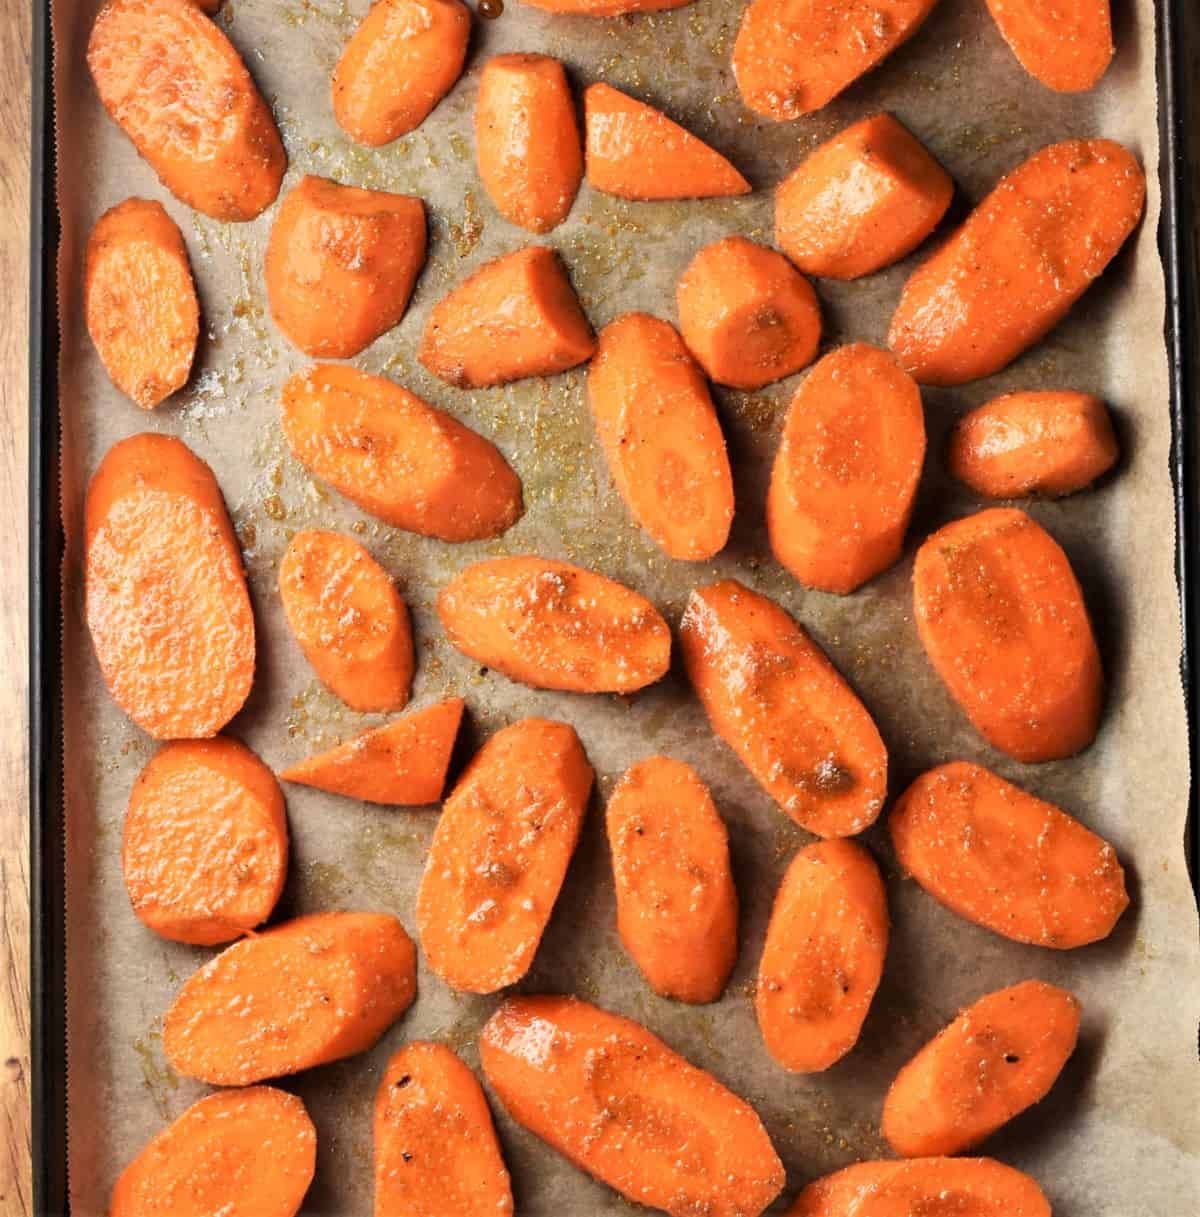 Slices of carrots on top of parchment.